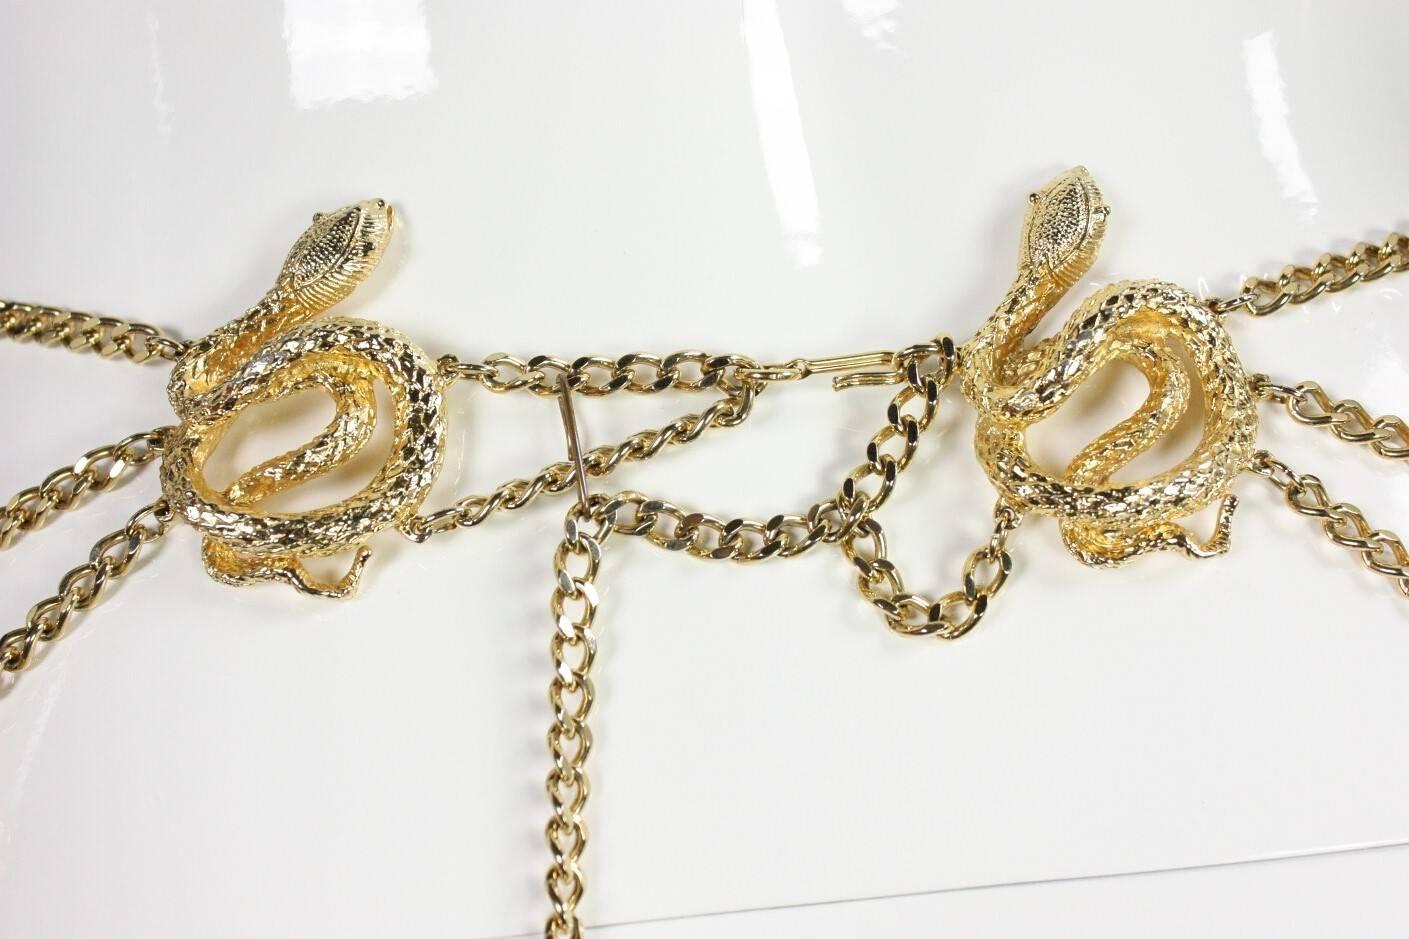 Gold-Toned Vintage Snake Chain Belt In Excellent Condition For Sale In Los Angeles, CA